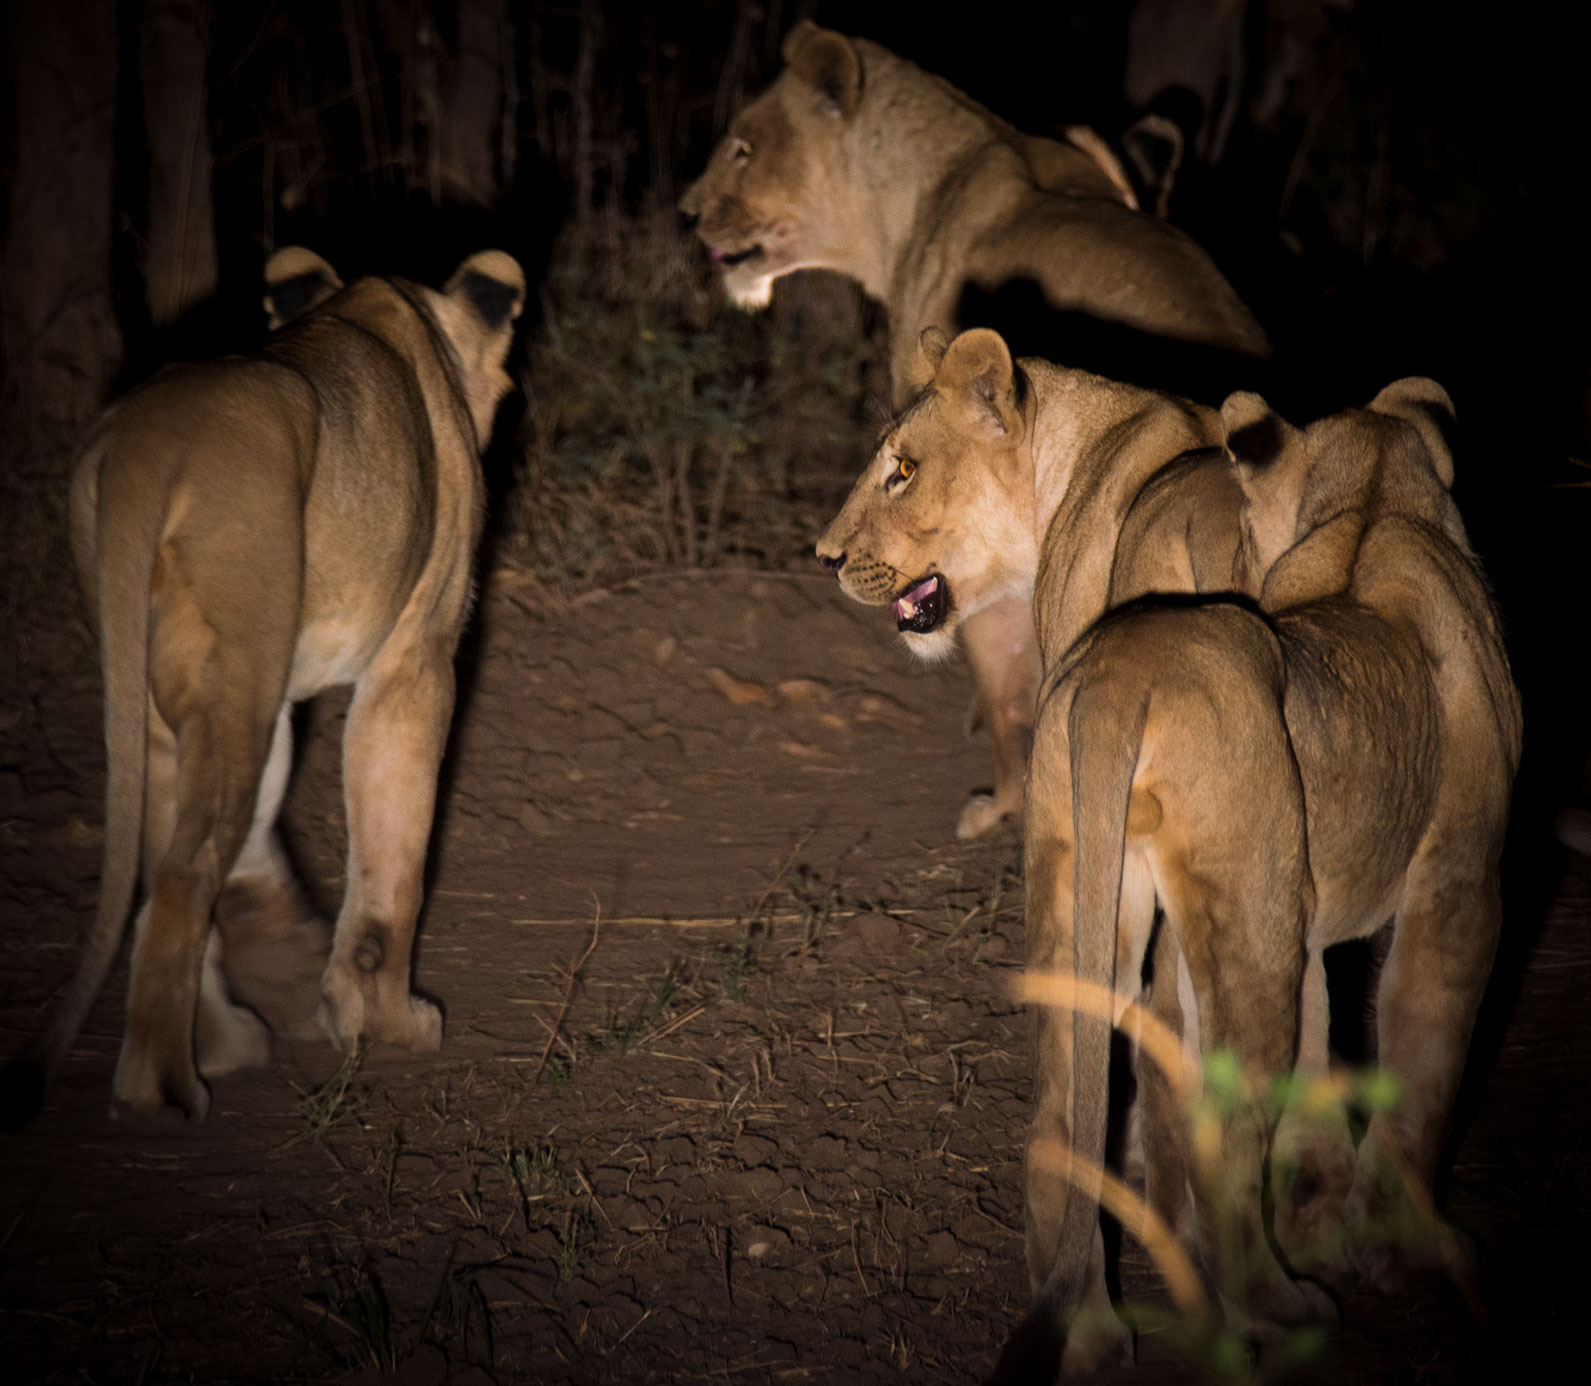 Nsefu pride of lions on a night game drive from the camp at Tena Tena. South Luangwa National Park, Zambia